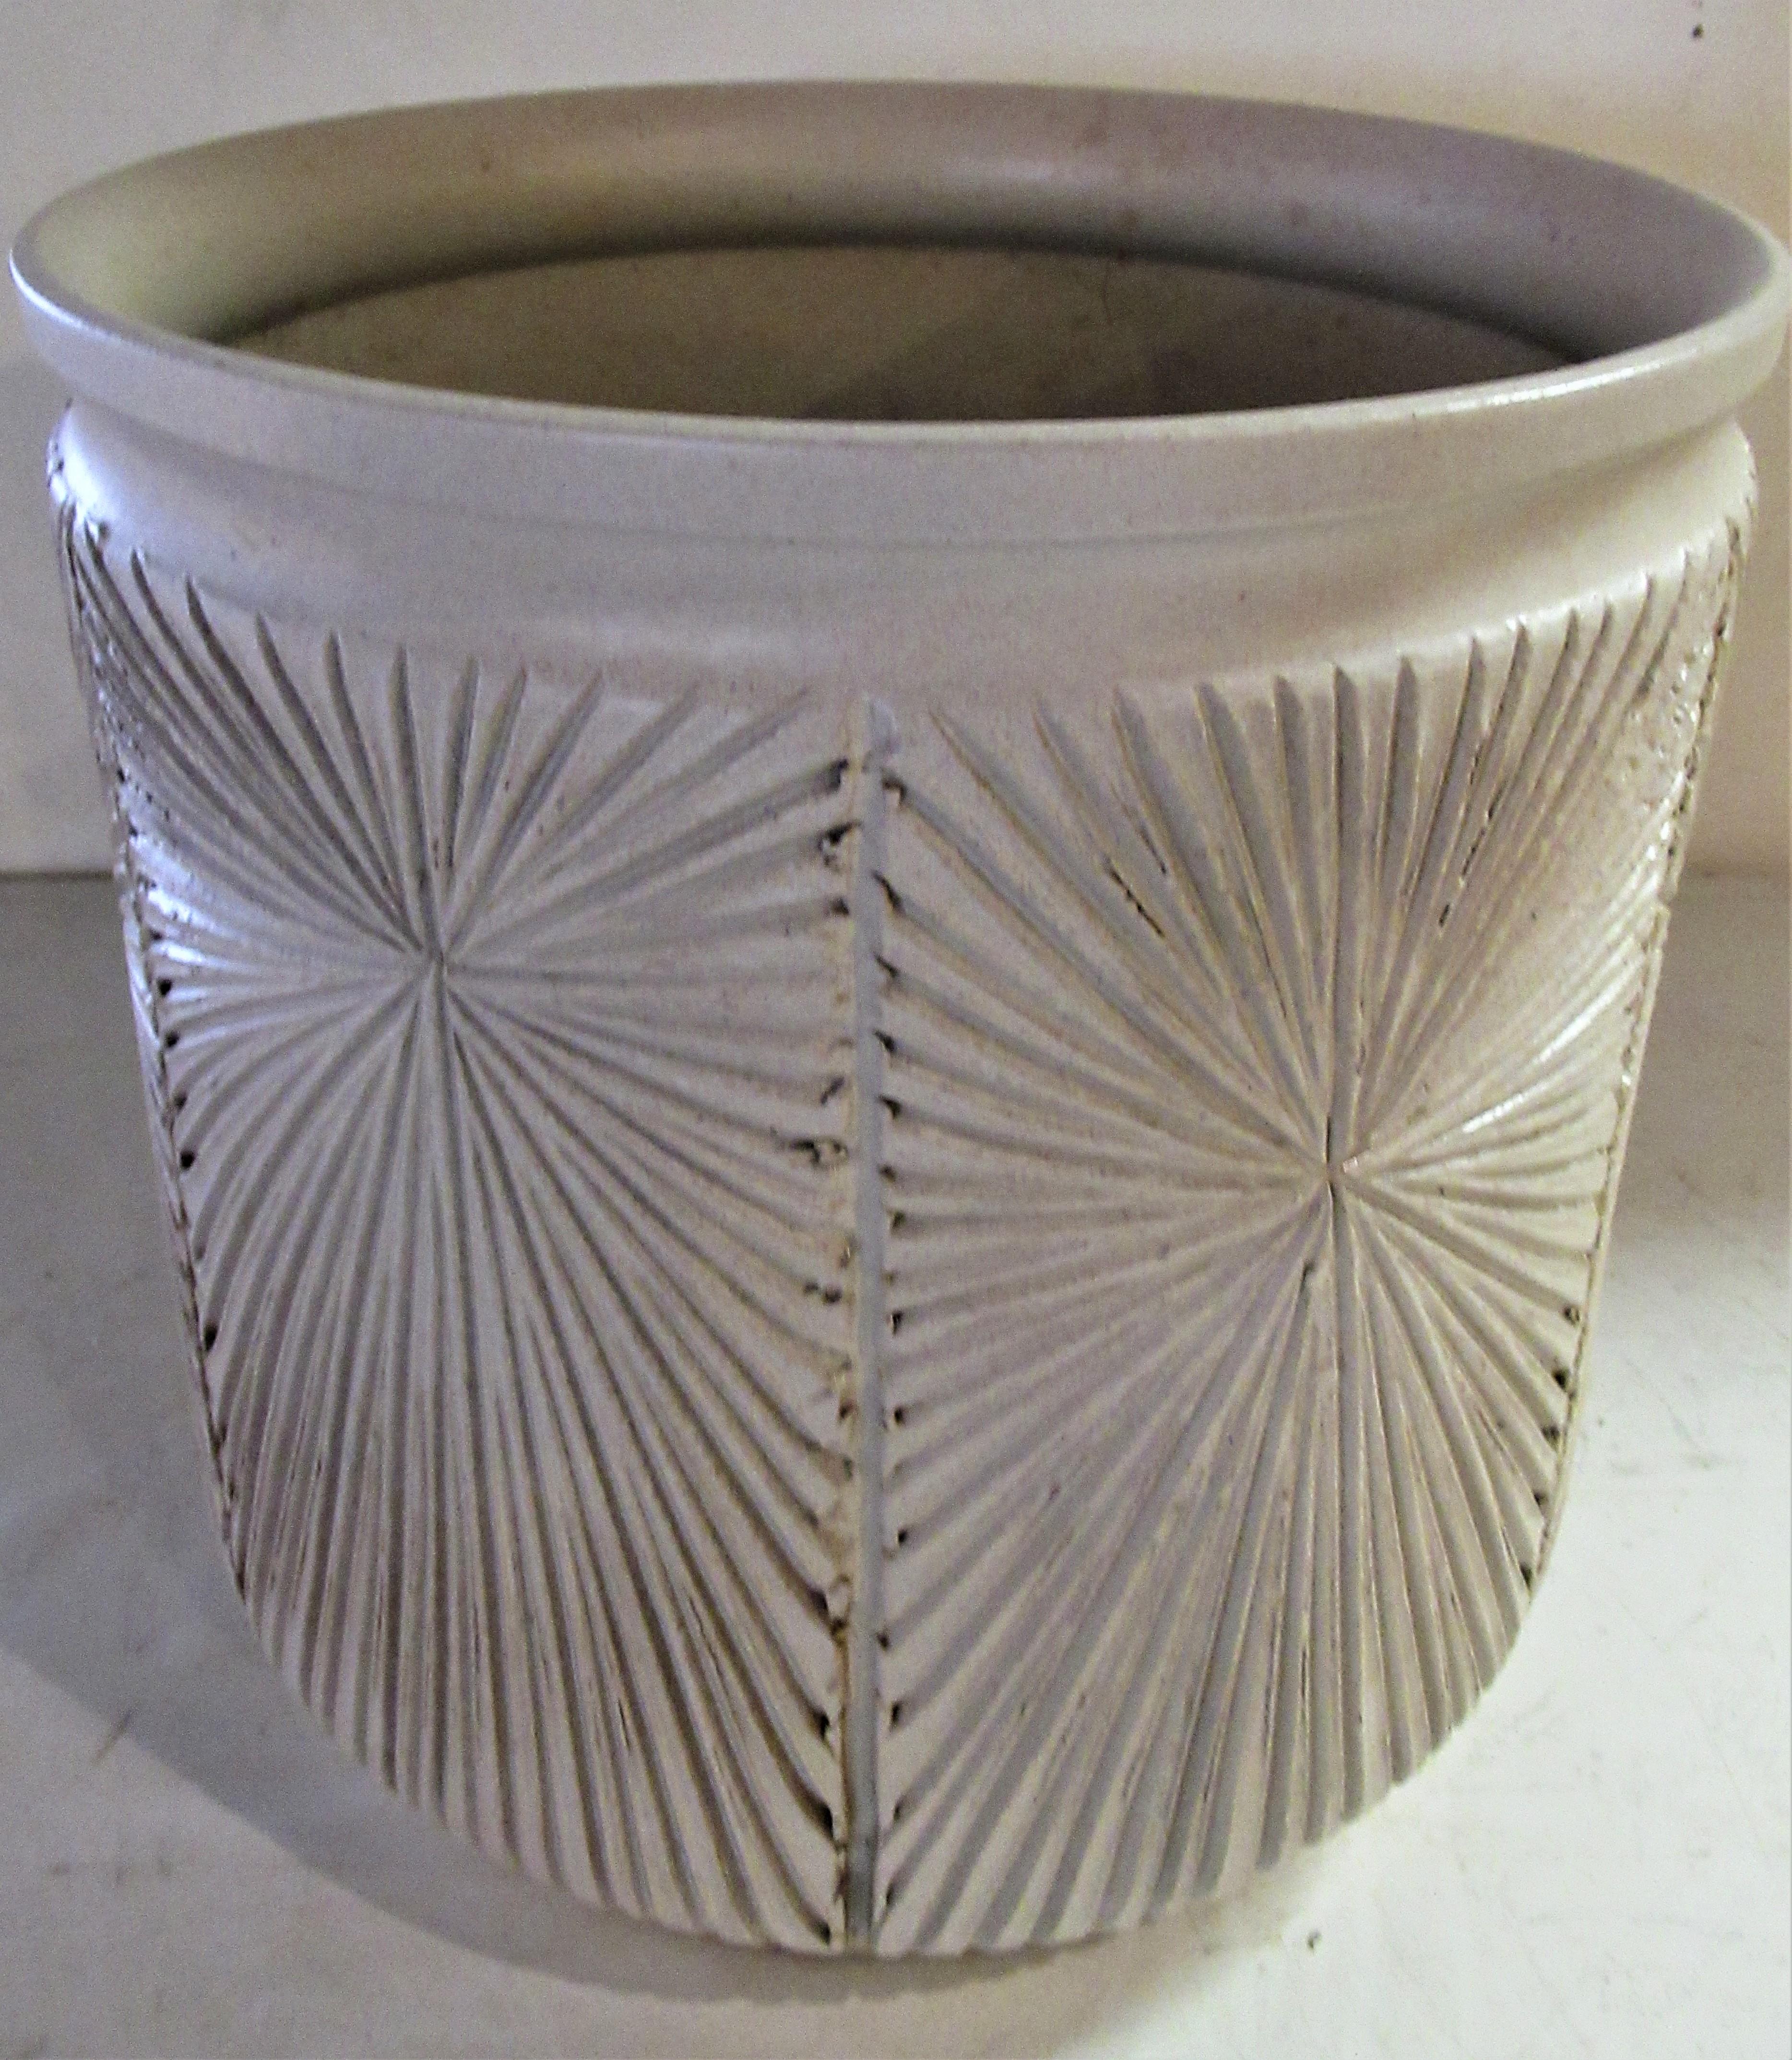 American Earthgender Architectural Pottery Planter by Robert Maxwell and David Cressey